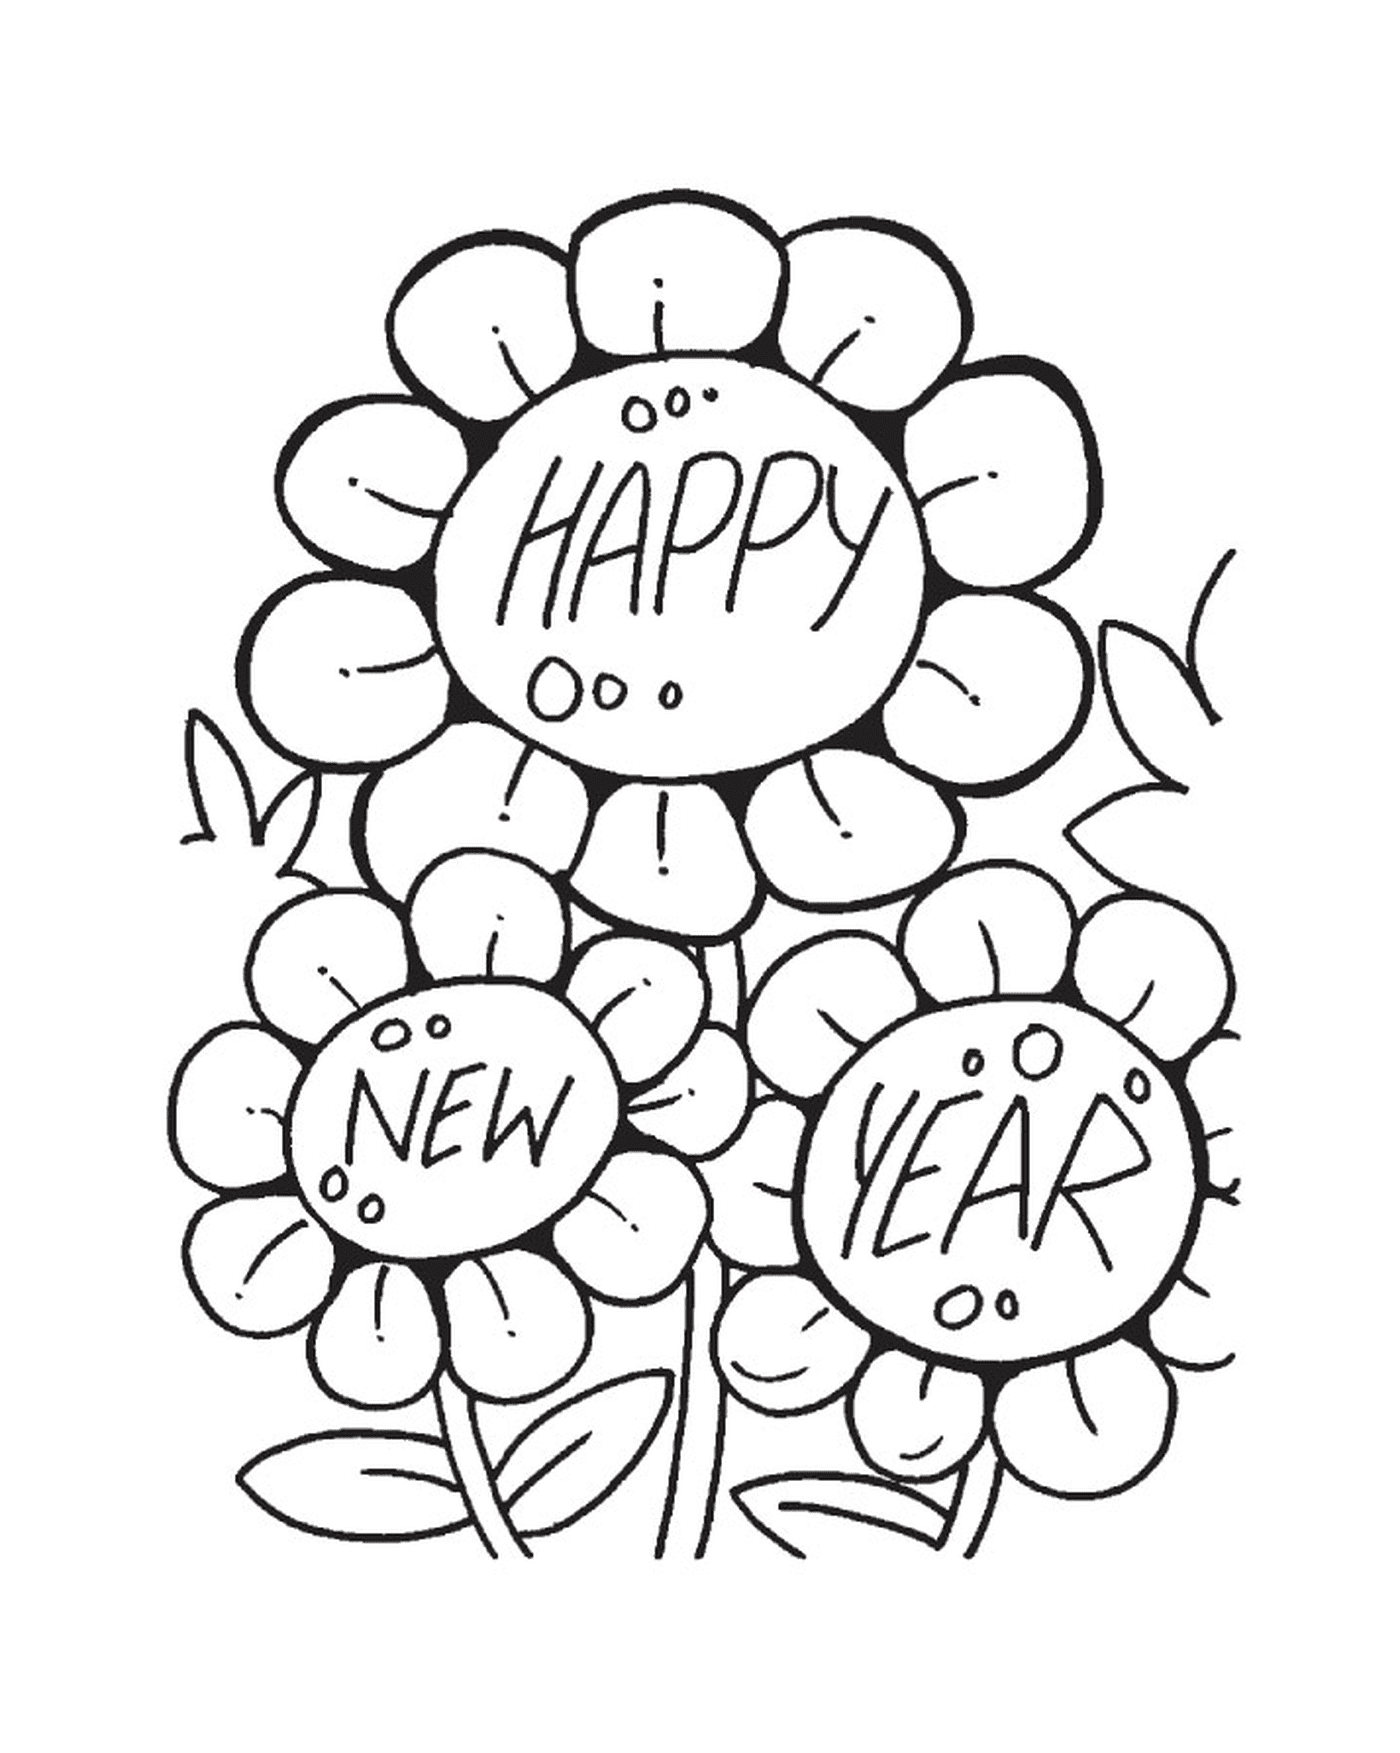  Flowers for the New Year, Happy New Year 2017 